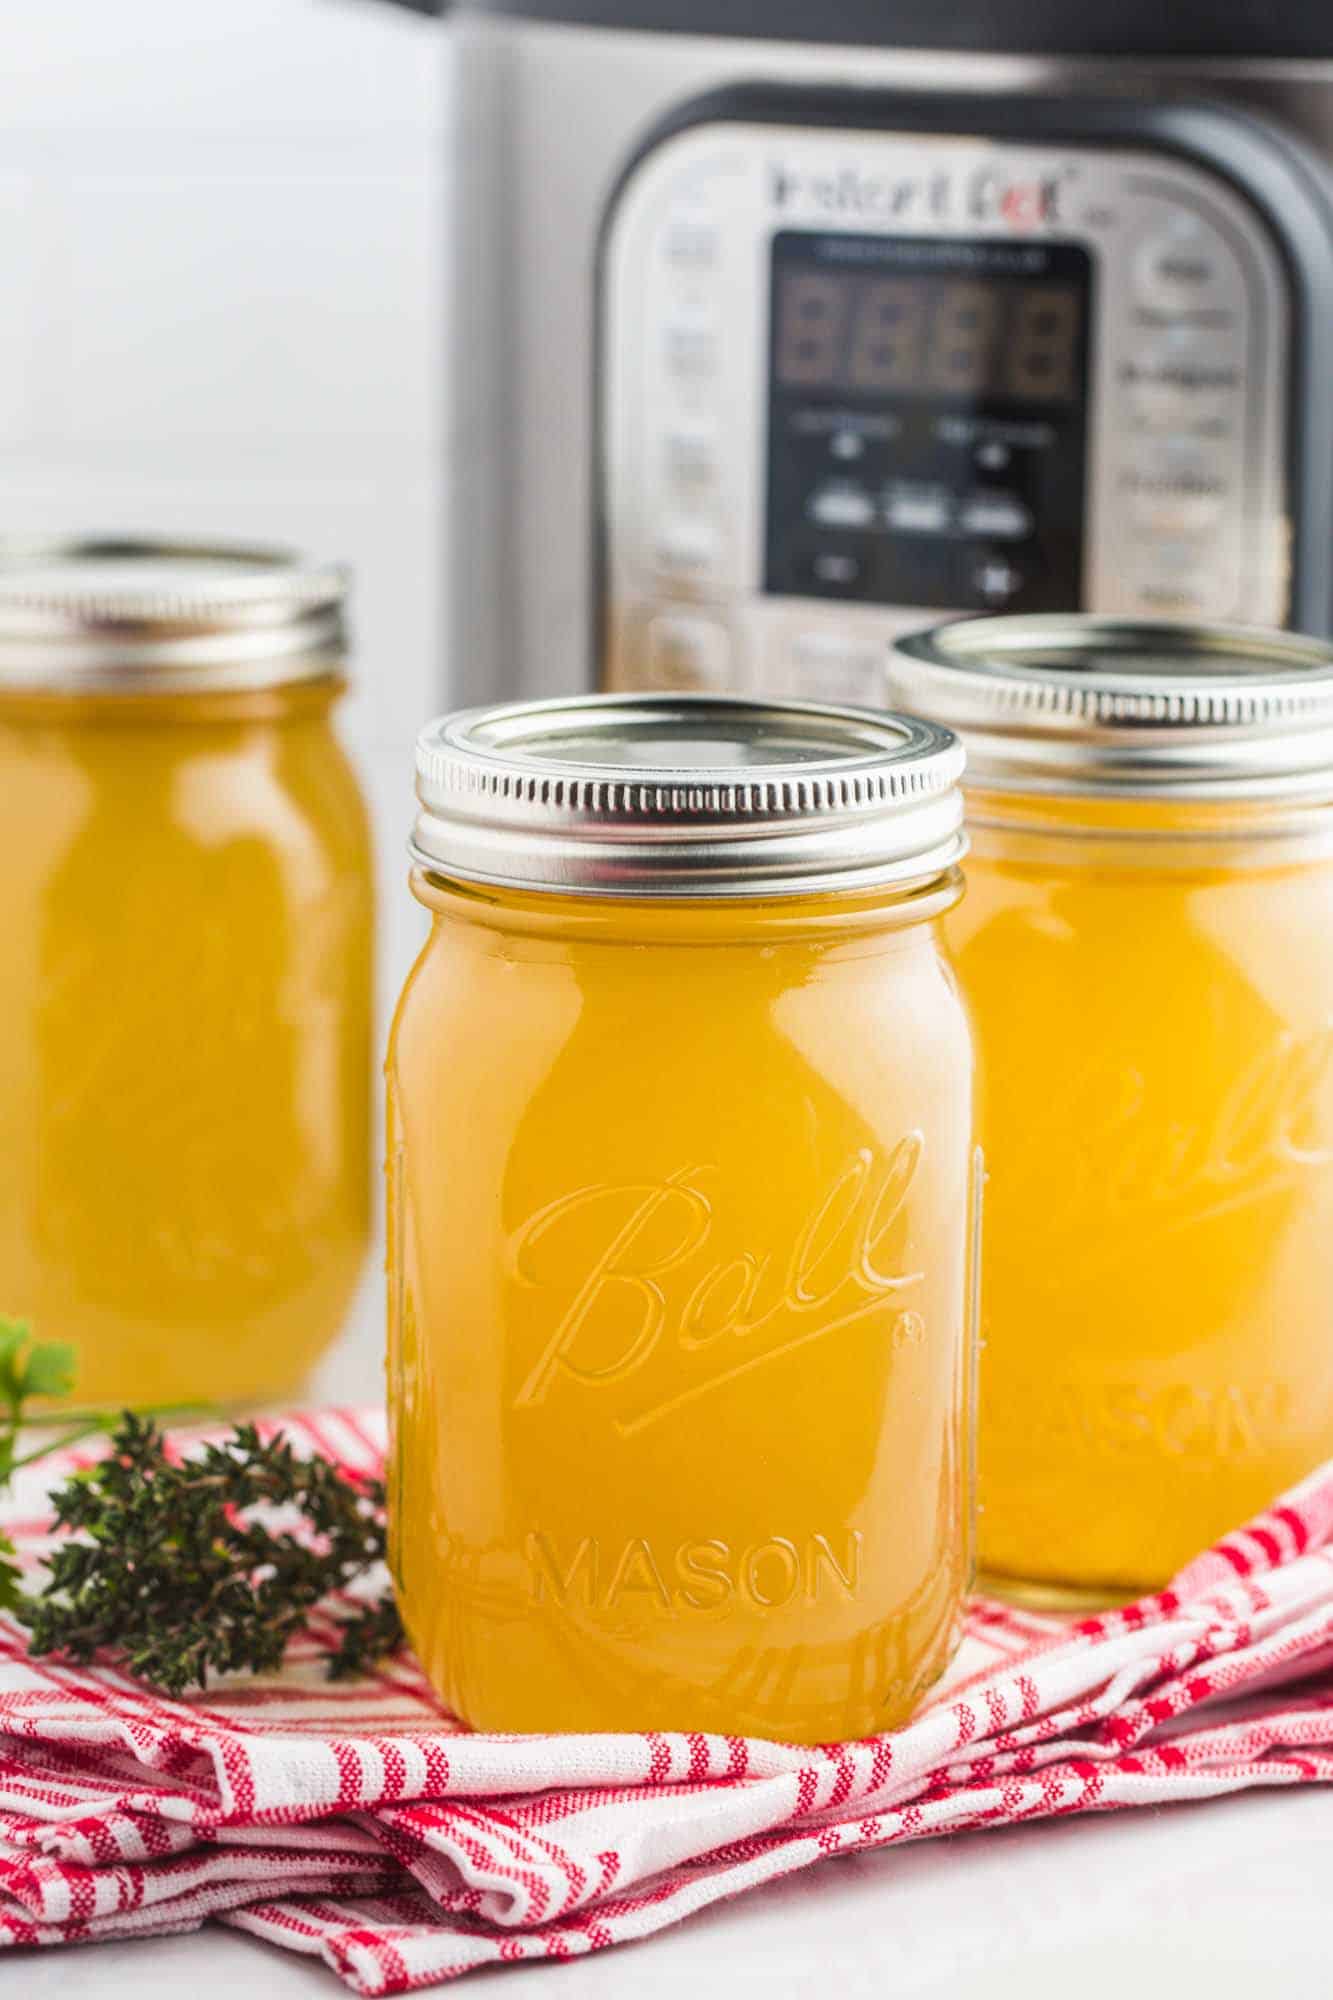 Turkey stock in jars, and an instant pot in the background.